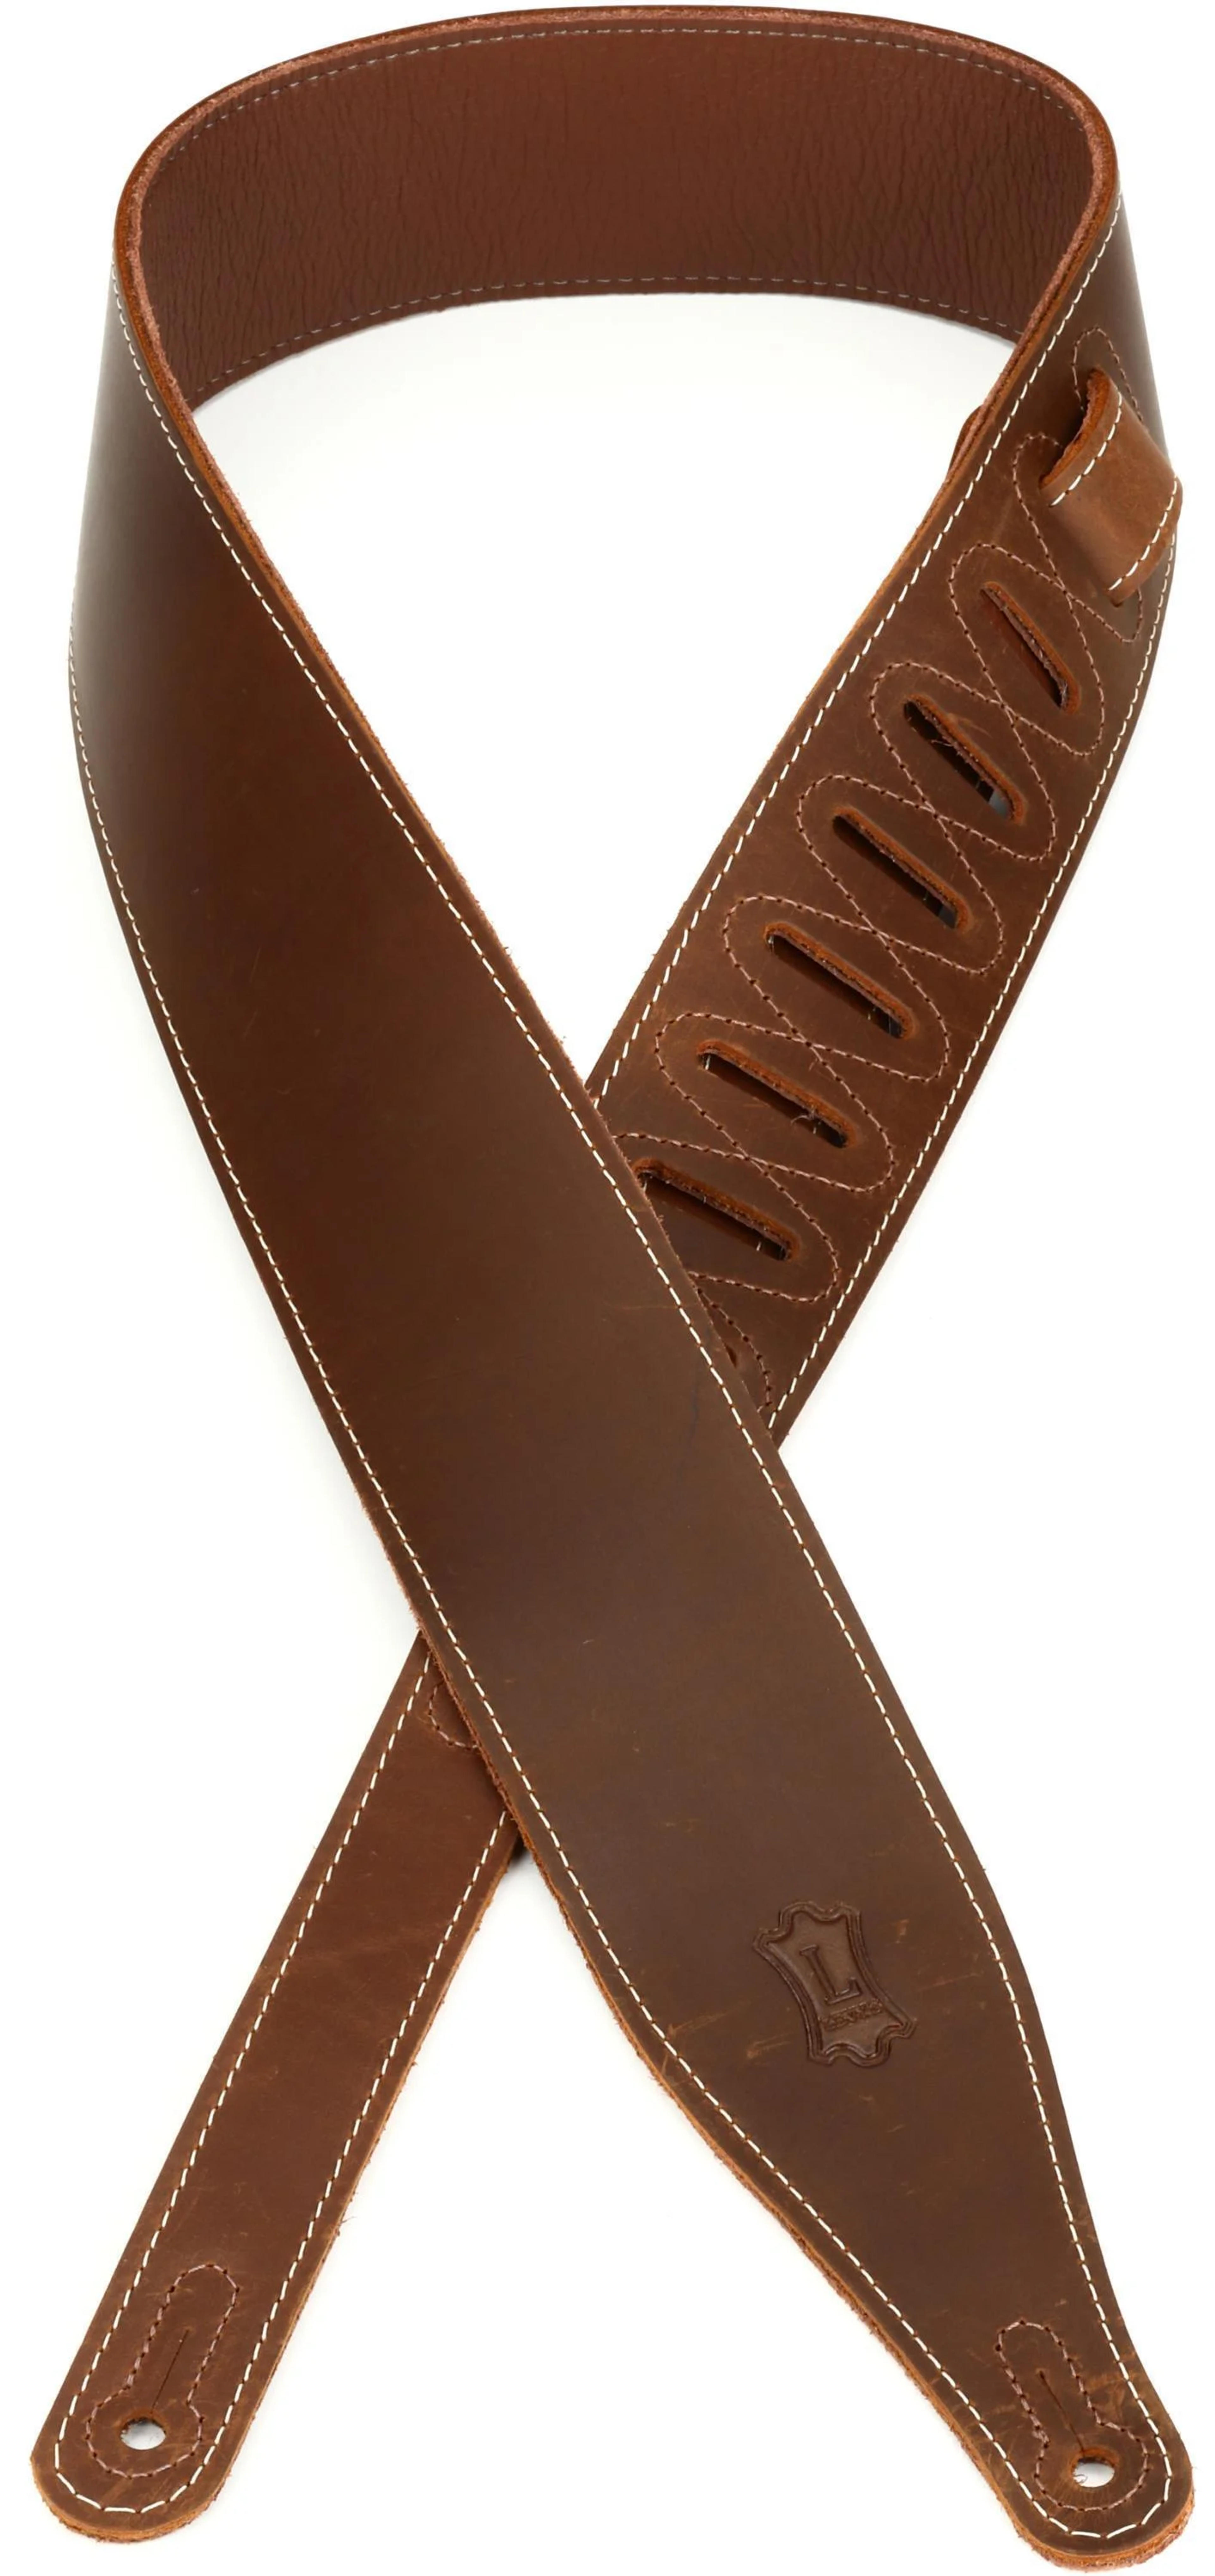 Levy's M17BSS-BRN 2.5" Wide Pull-Up Butter Leather Guitar Strap - Brown Sweetwater Exclusive